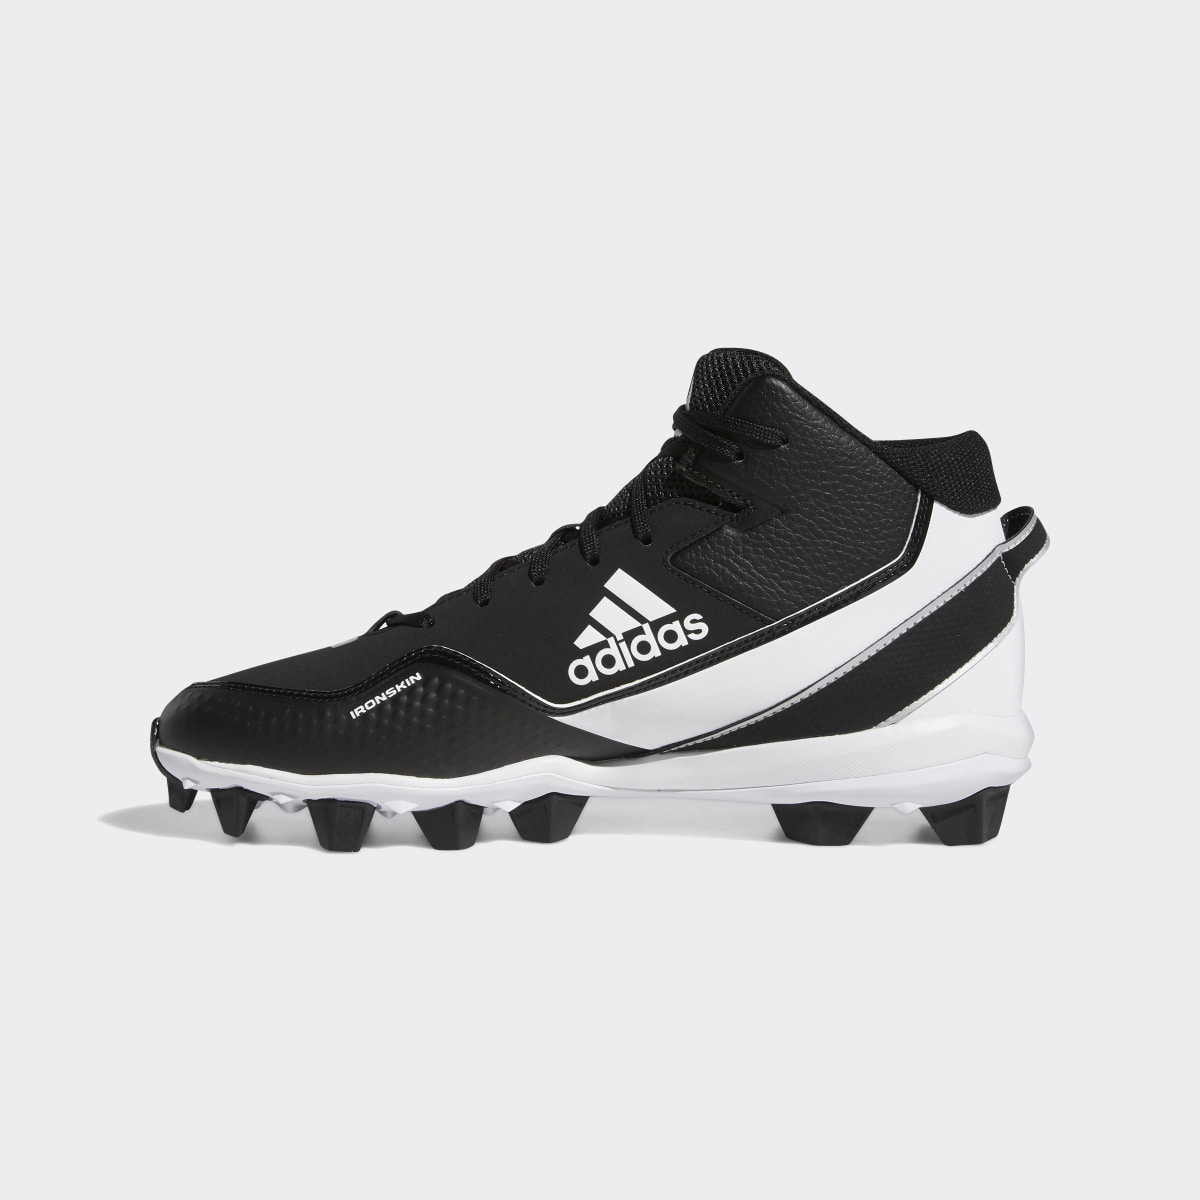 Adidas Icon 7 Mid MD Cleats. 7